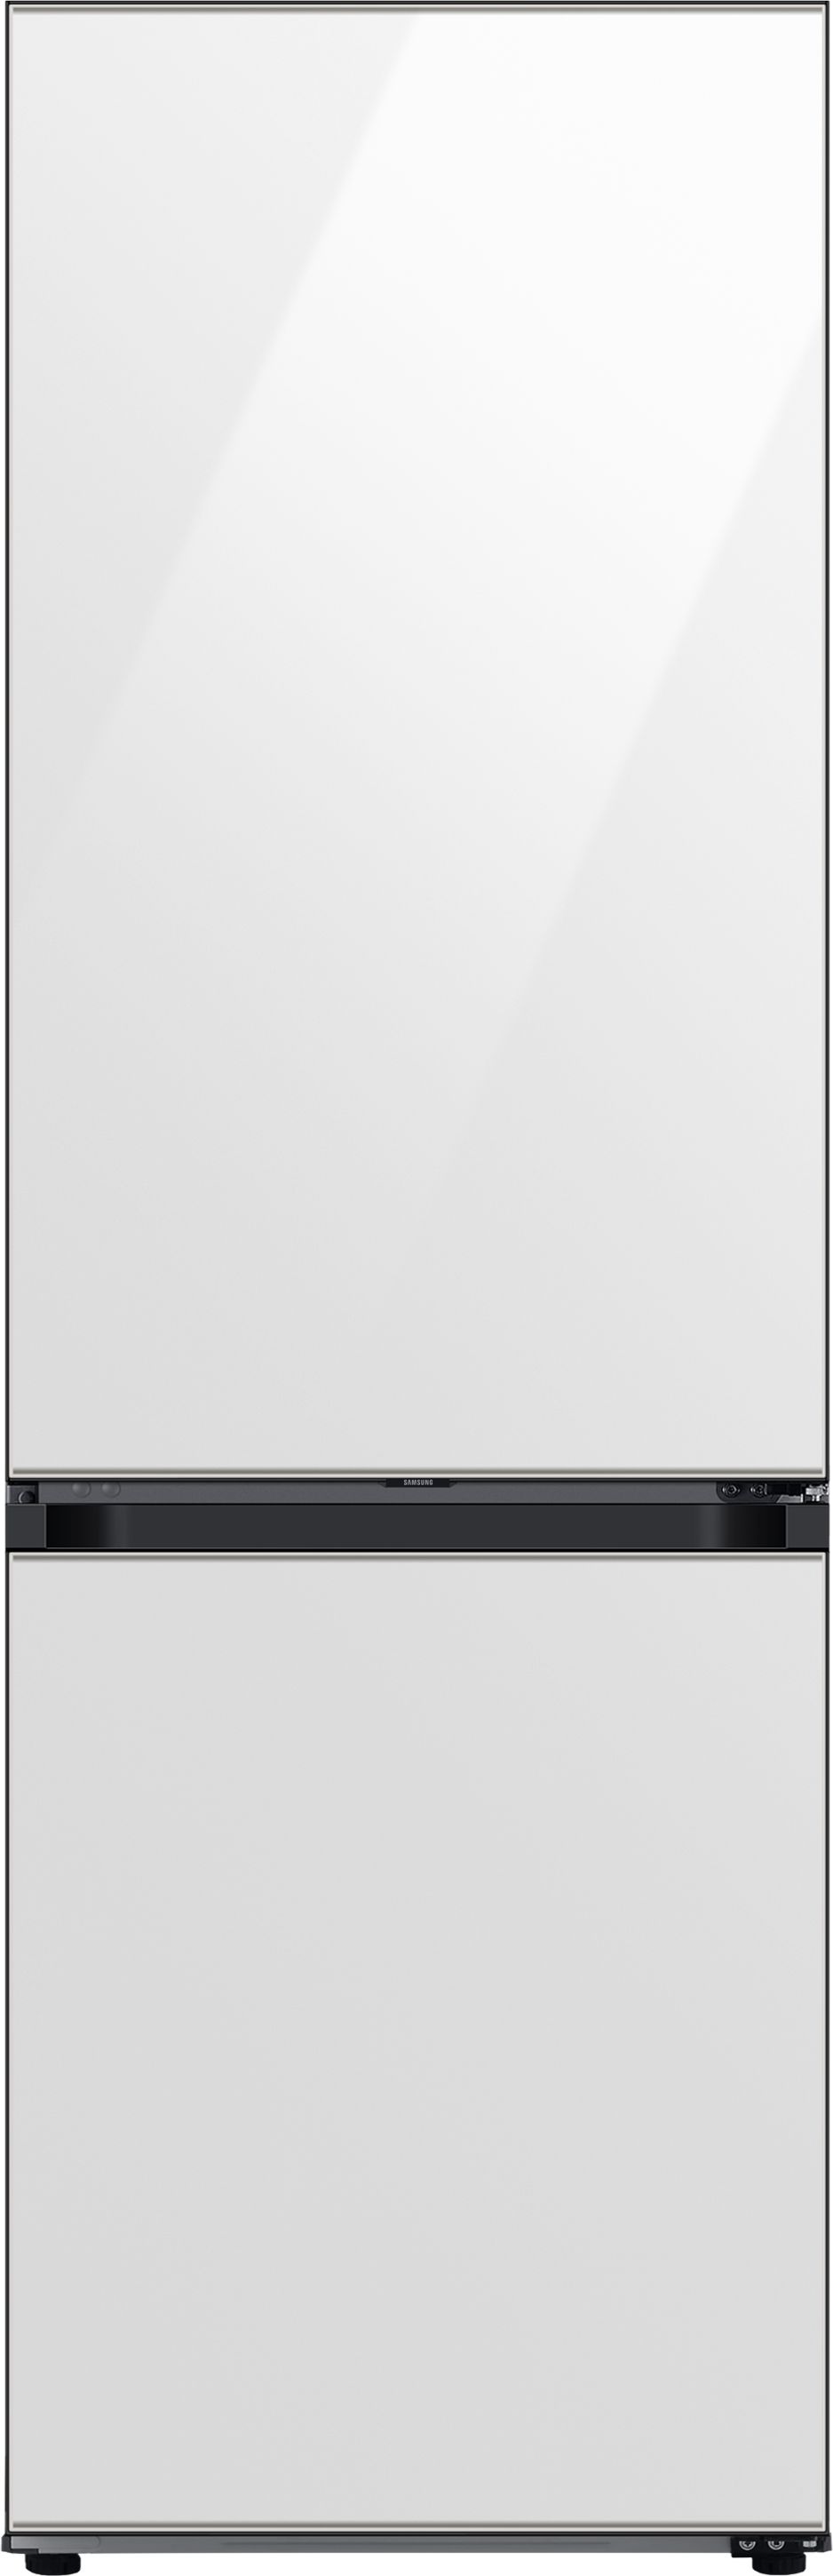 Samsung Bespoke Series 4 RB34C6B2E12 Wifi Connected 70/30 No Frost Fridge Freezer - Clean White - E Rated, White